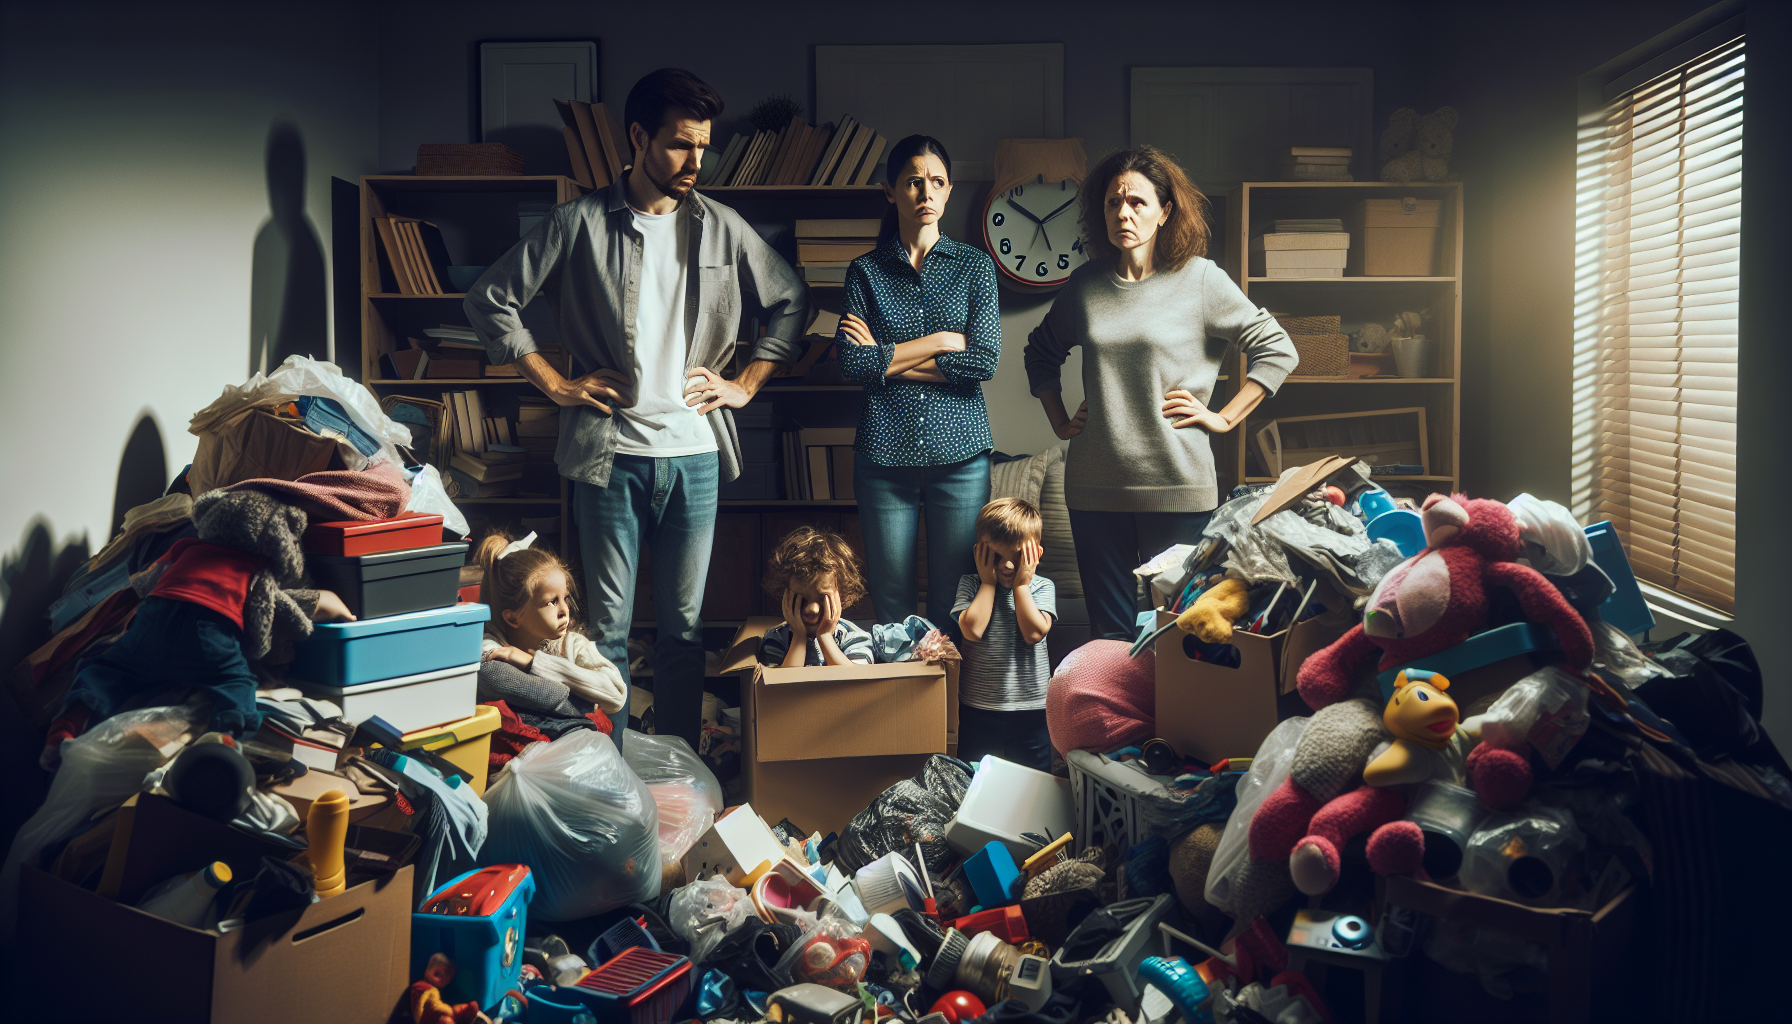 A family in conflict over clutter and hoarded items